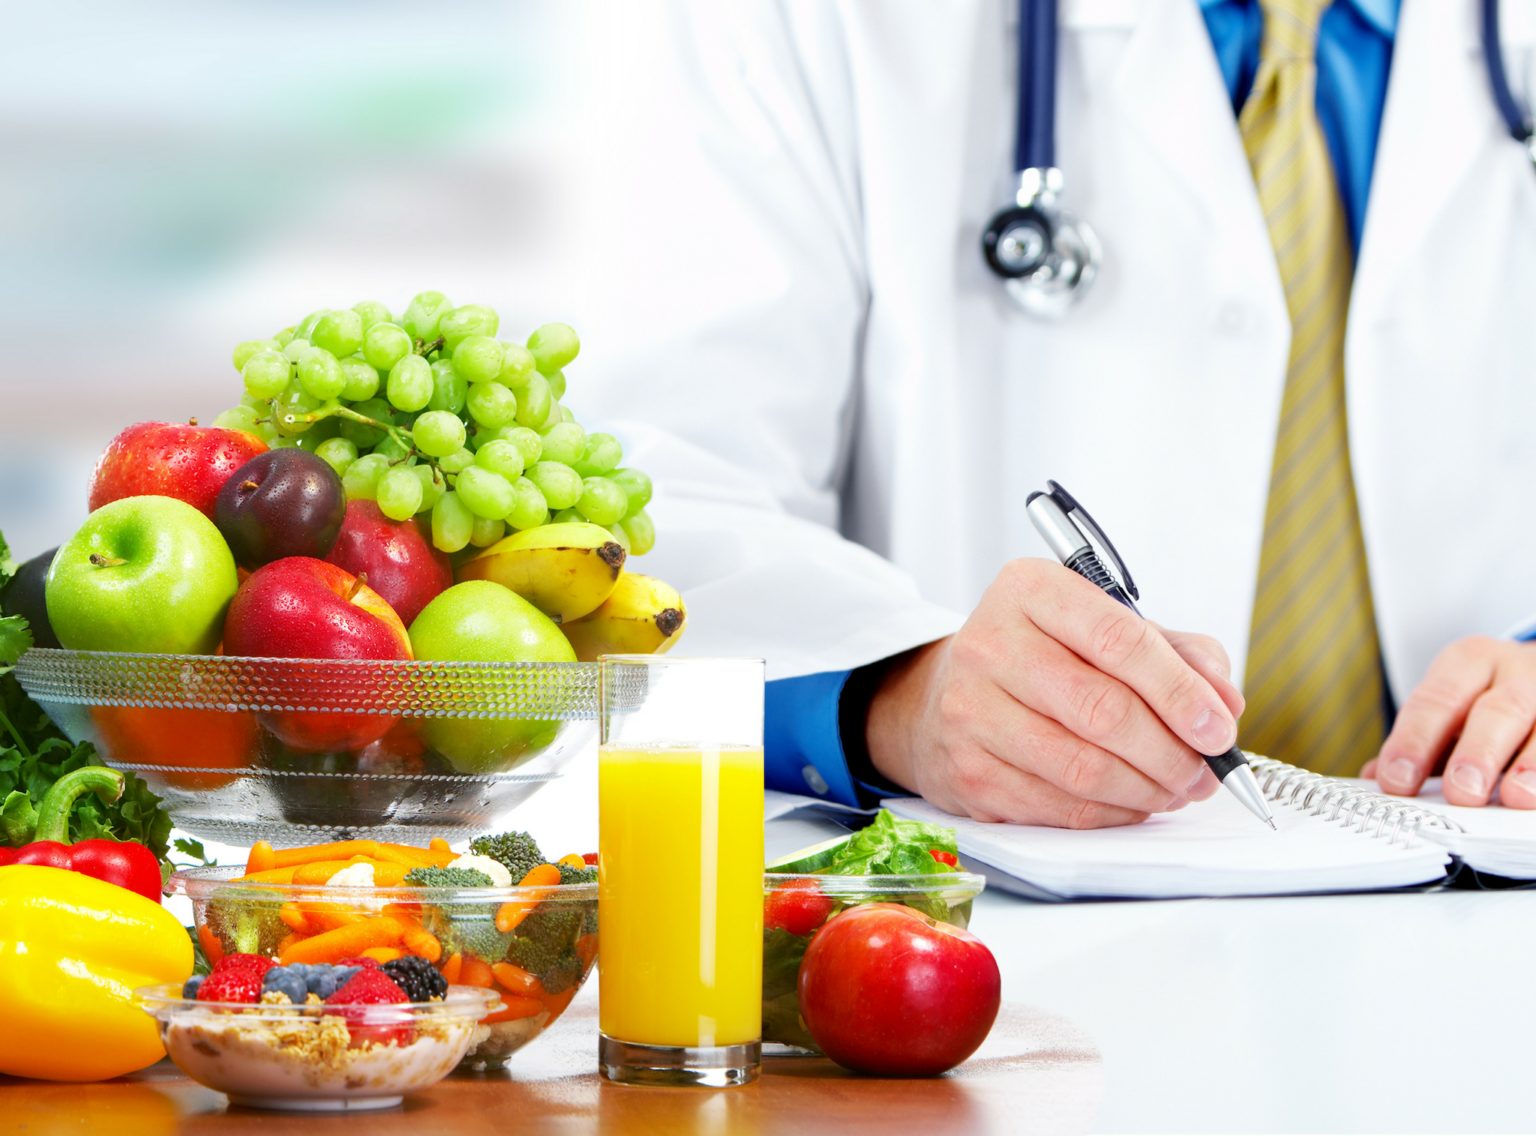 Canada Clinical Nutrition Market Is Estimated To Witness High Growth Owing To Rising Incidence of Chronic Diseases and Growing Geriatric Population